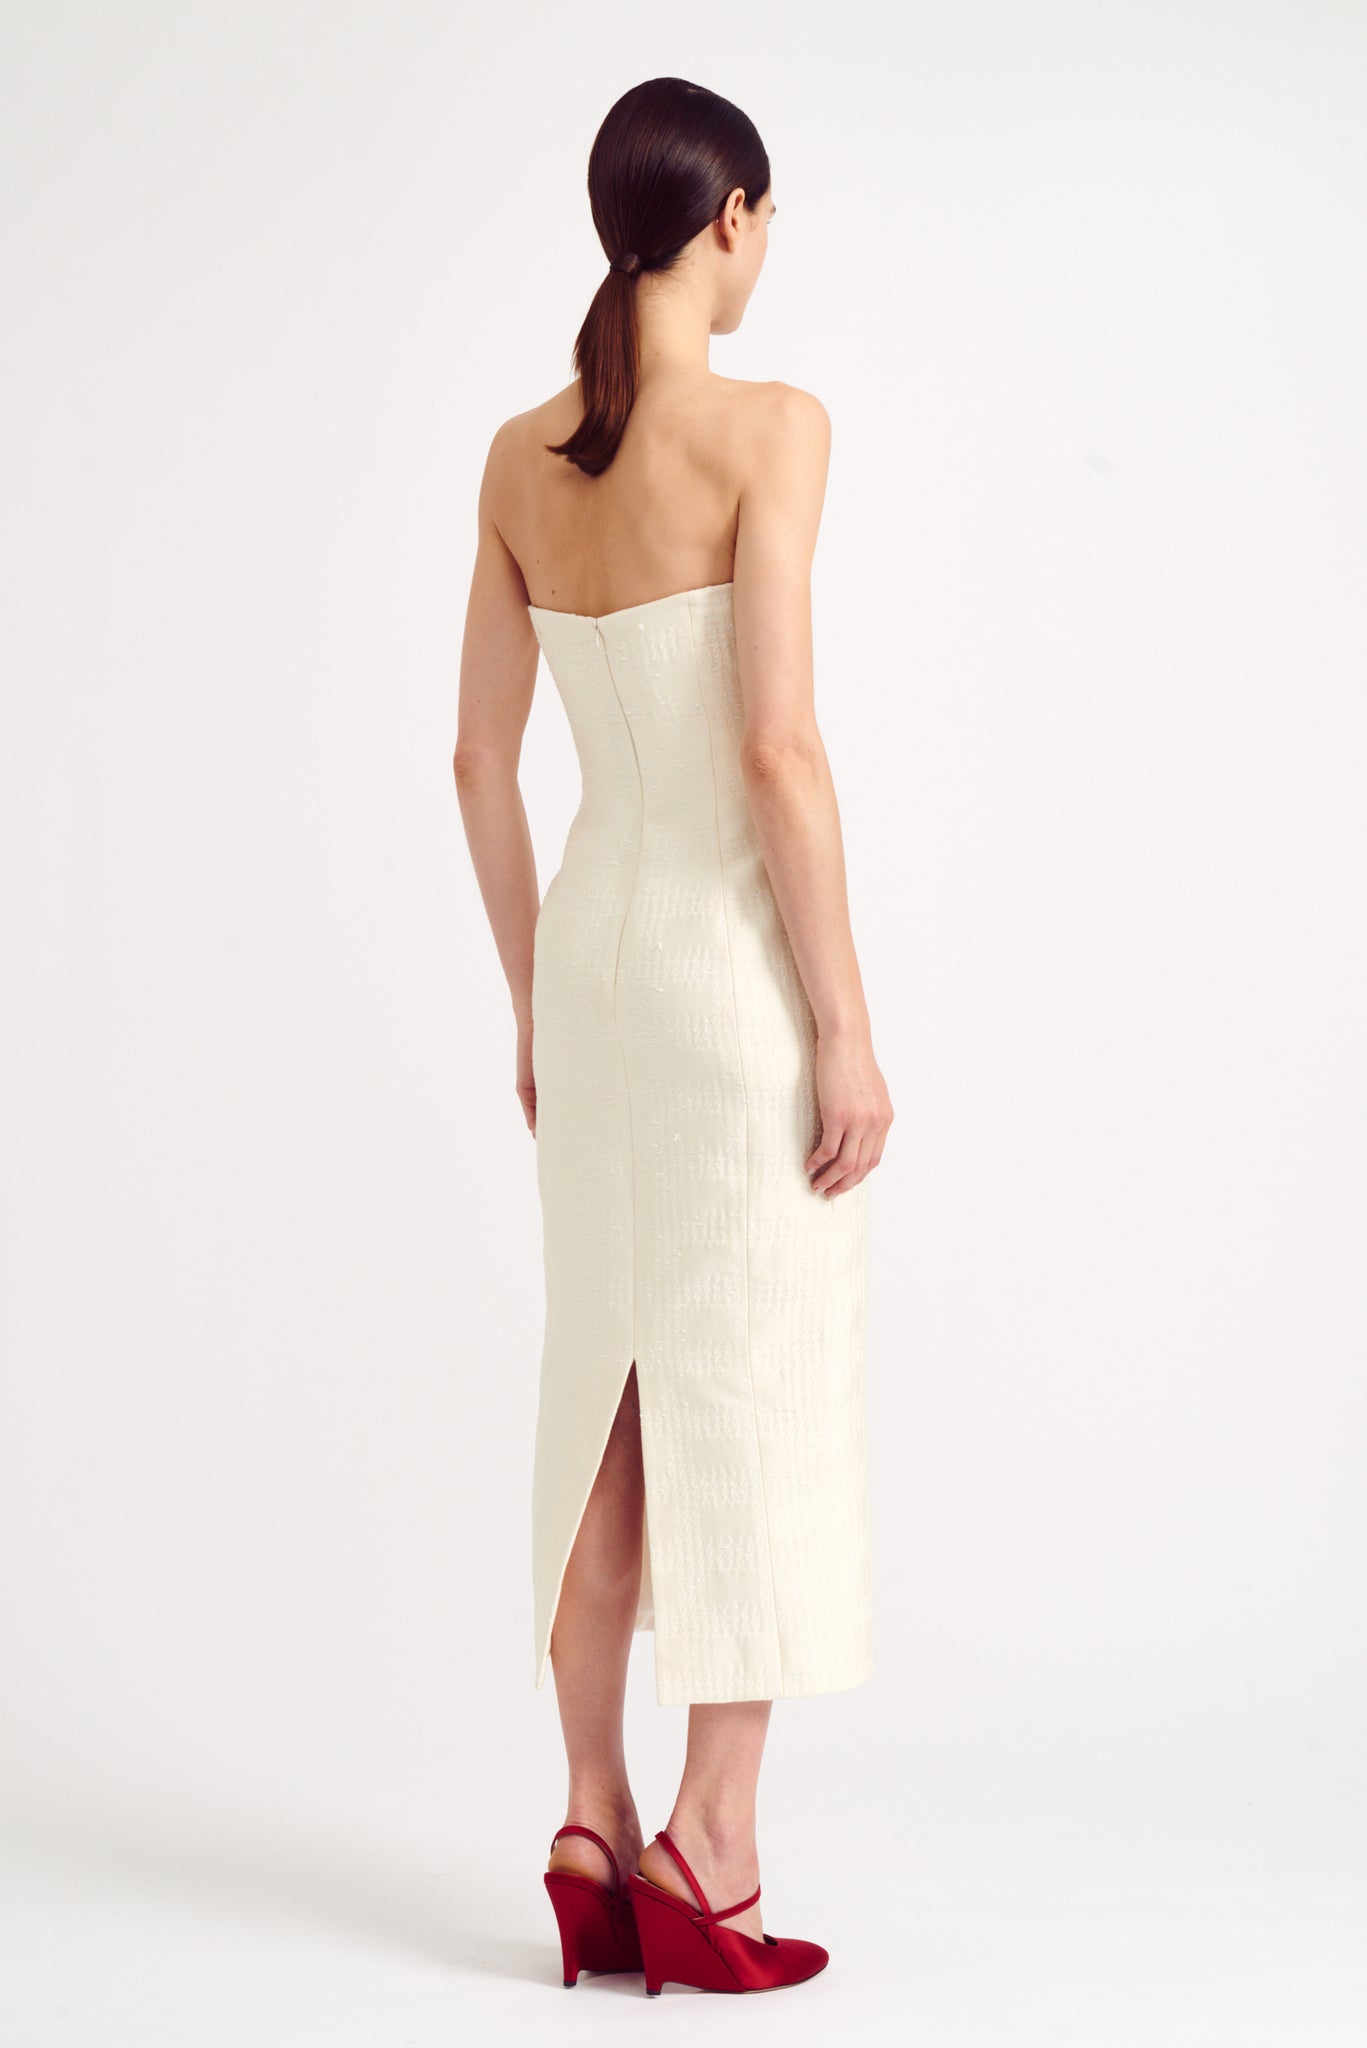 Lowre Strapless Dress in Check Ivory Tweed | Emilia Wickstead